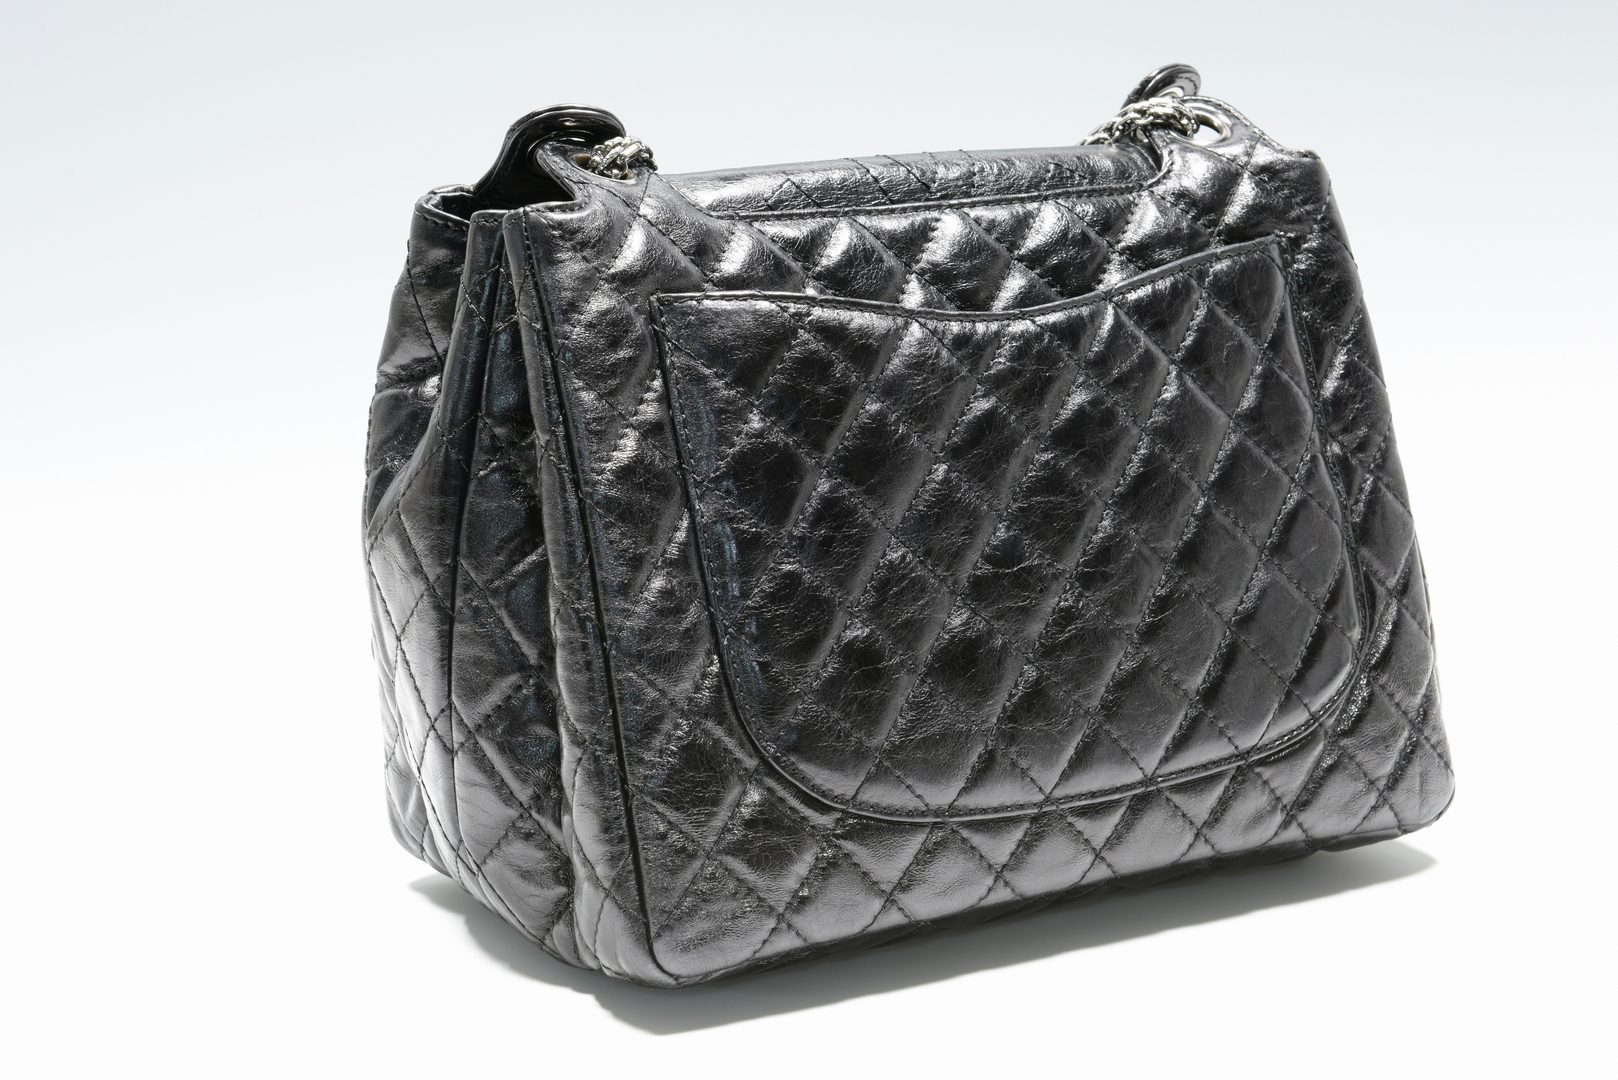 Lot 919: Chanel Classic Bag w/Flap, silver toned